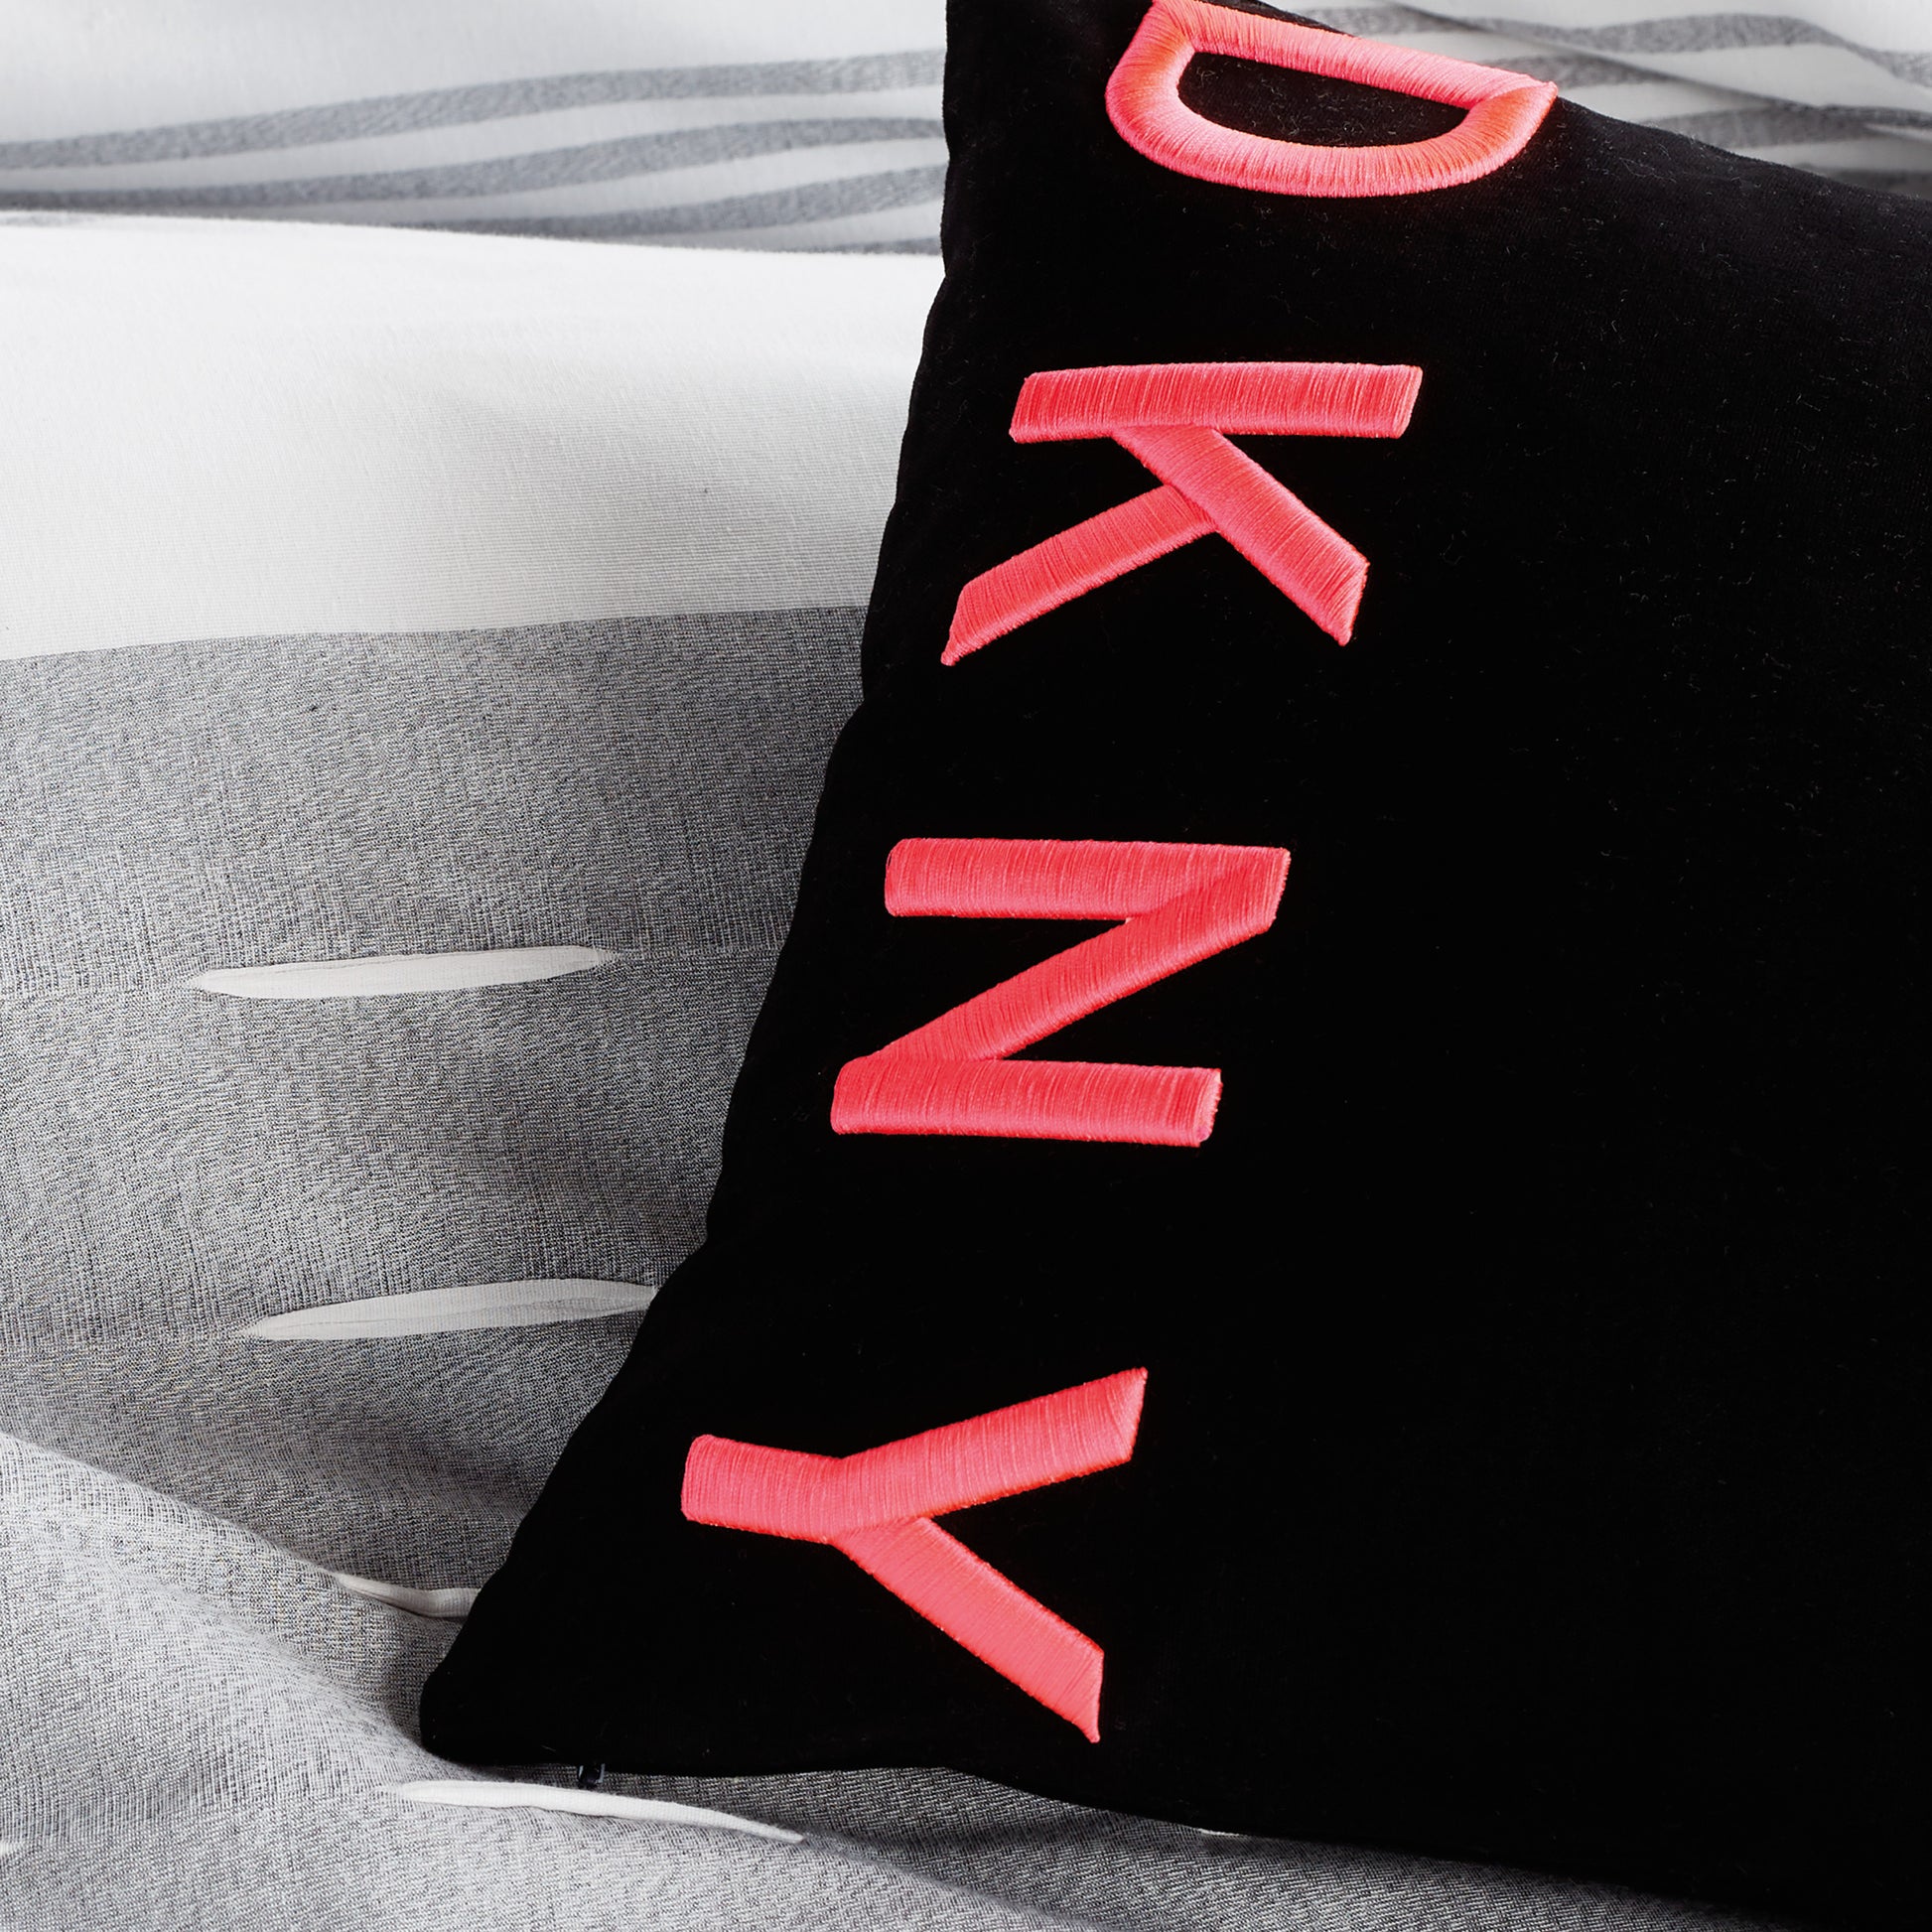 DKNY Embroidered Logo Decorative Pillow